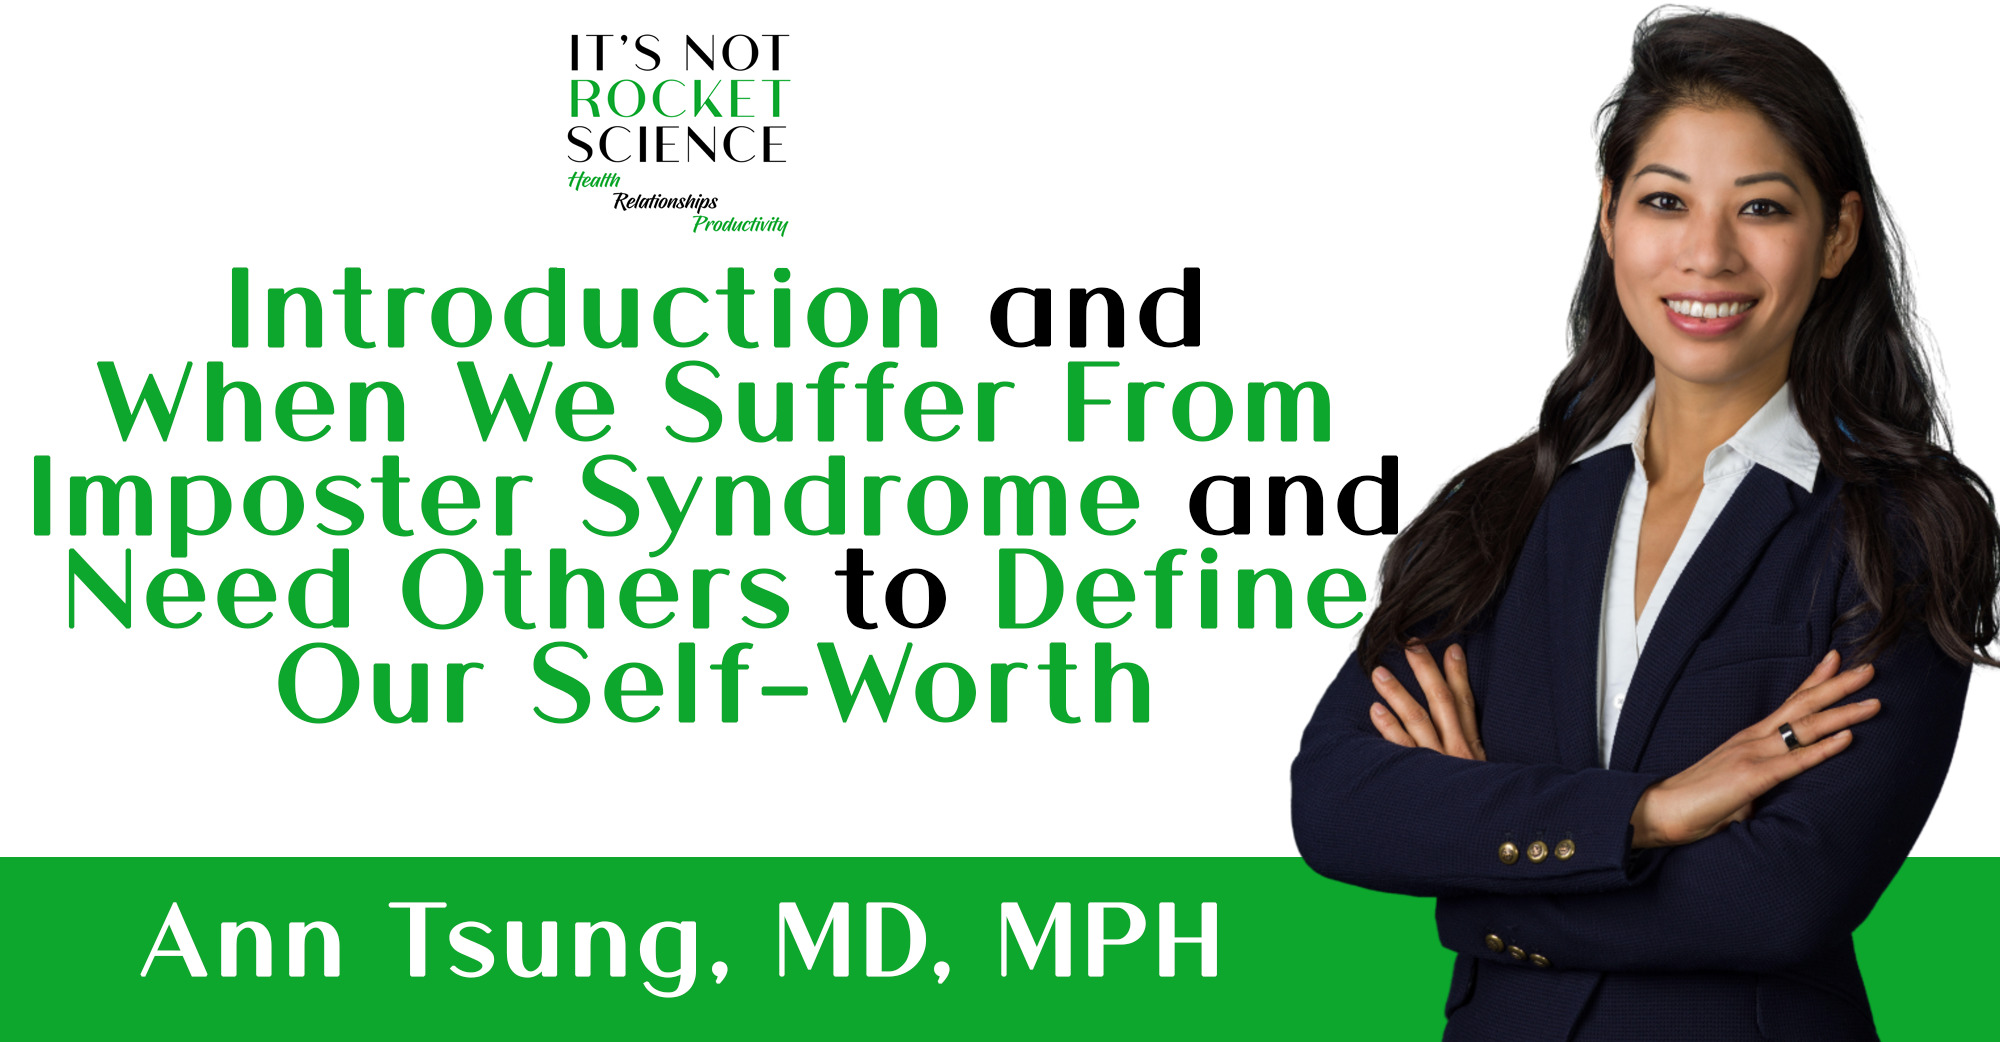 001 – Intro, When We Suffer From Imposter Syndrome and Need Others to Define Our Self Worth